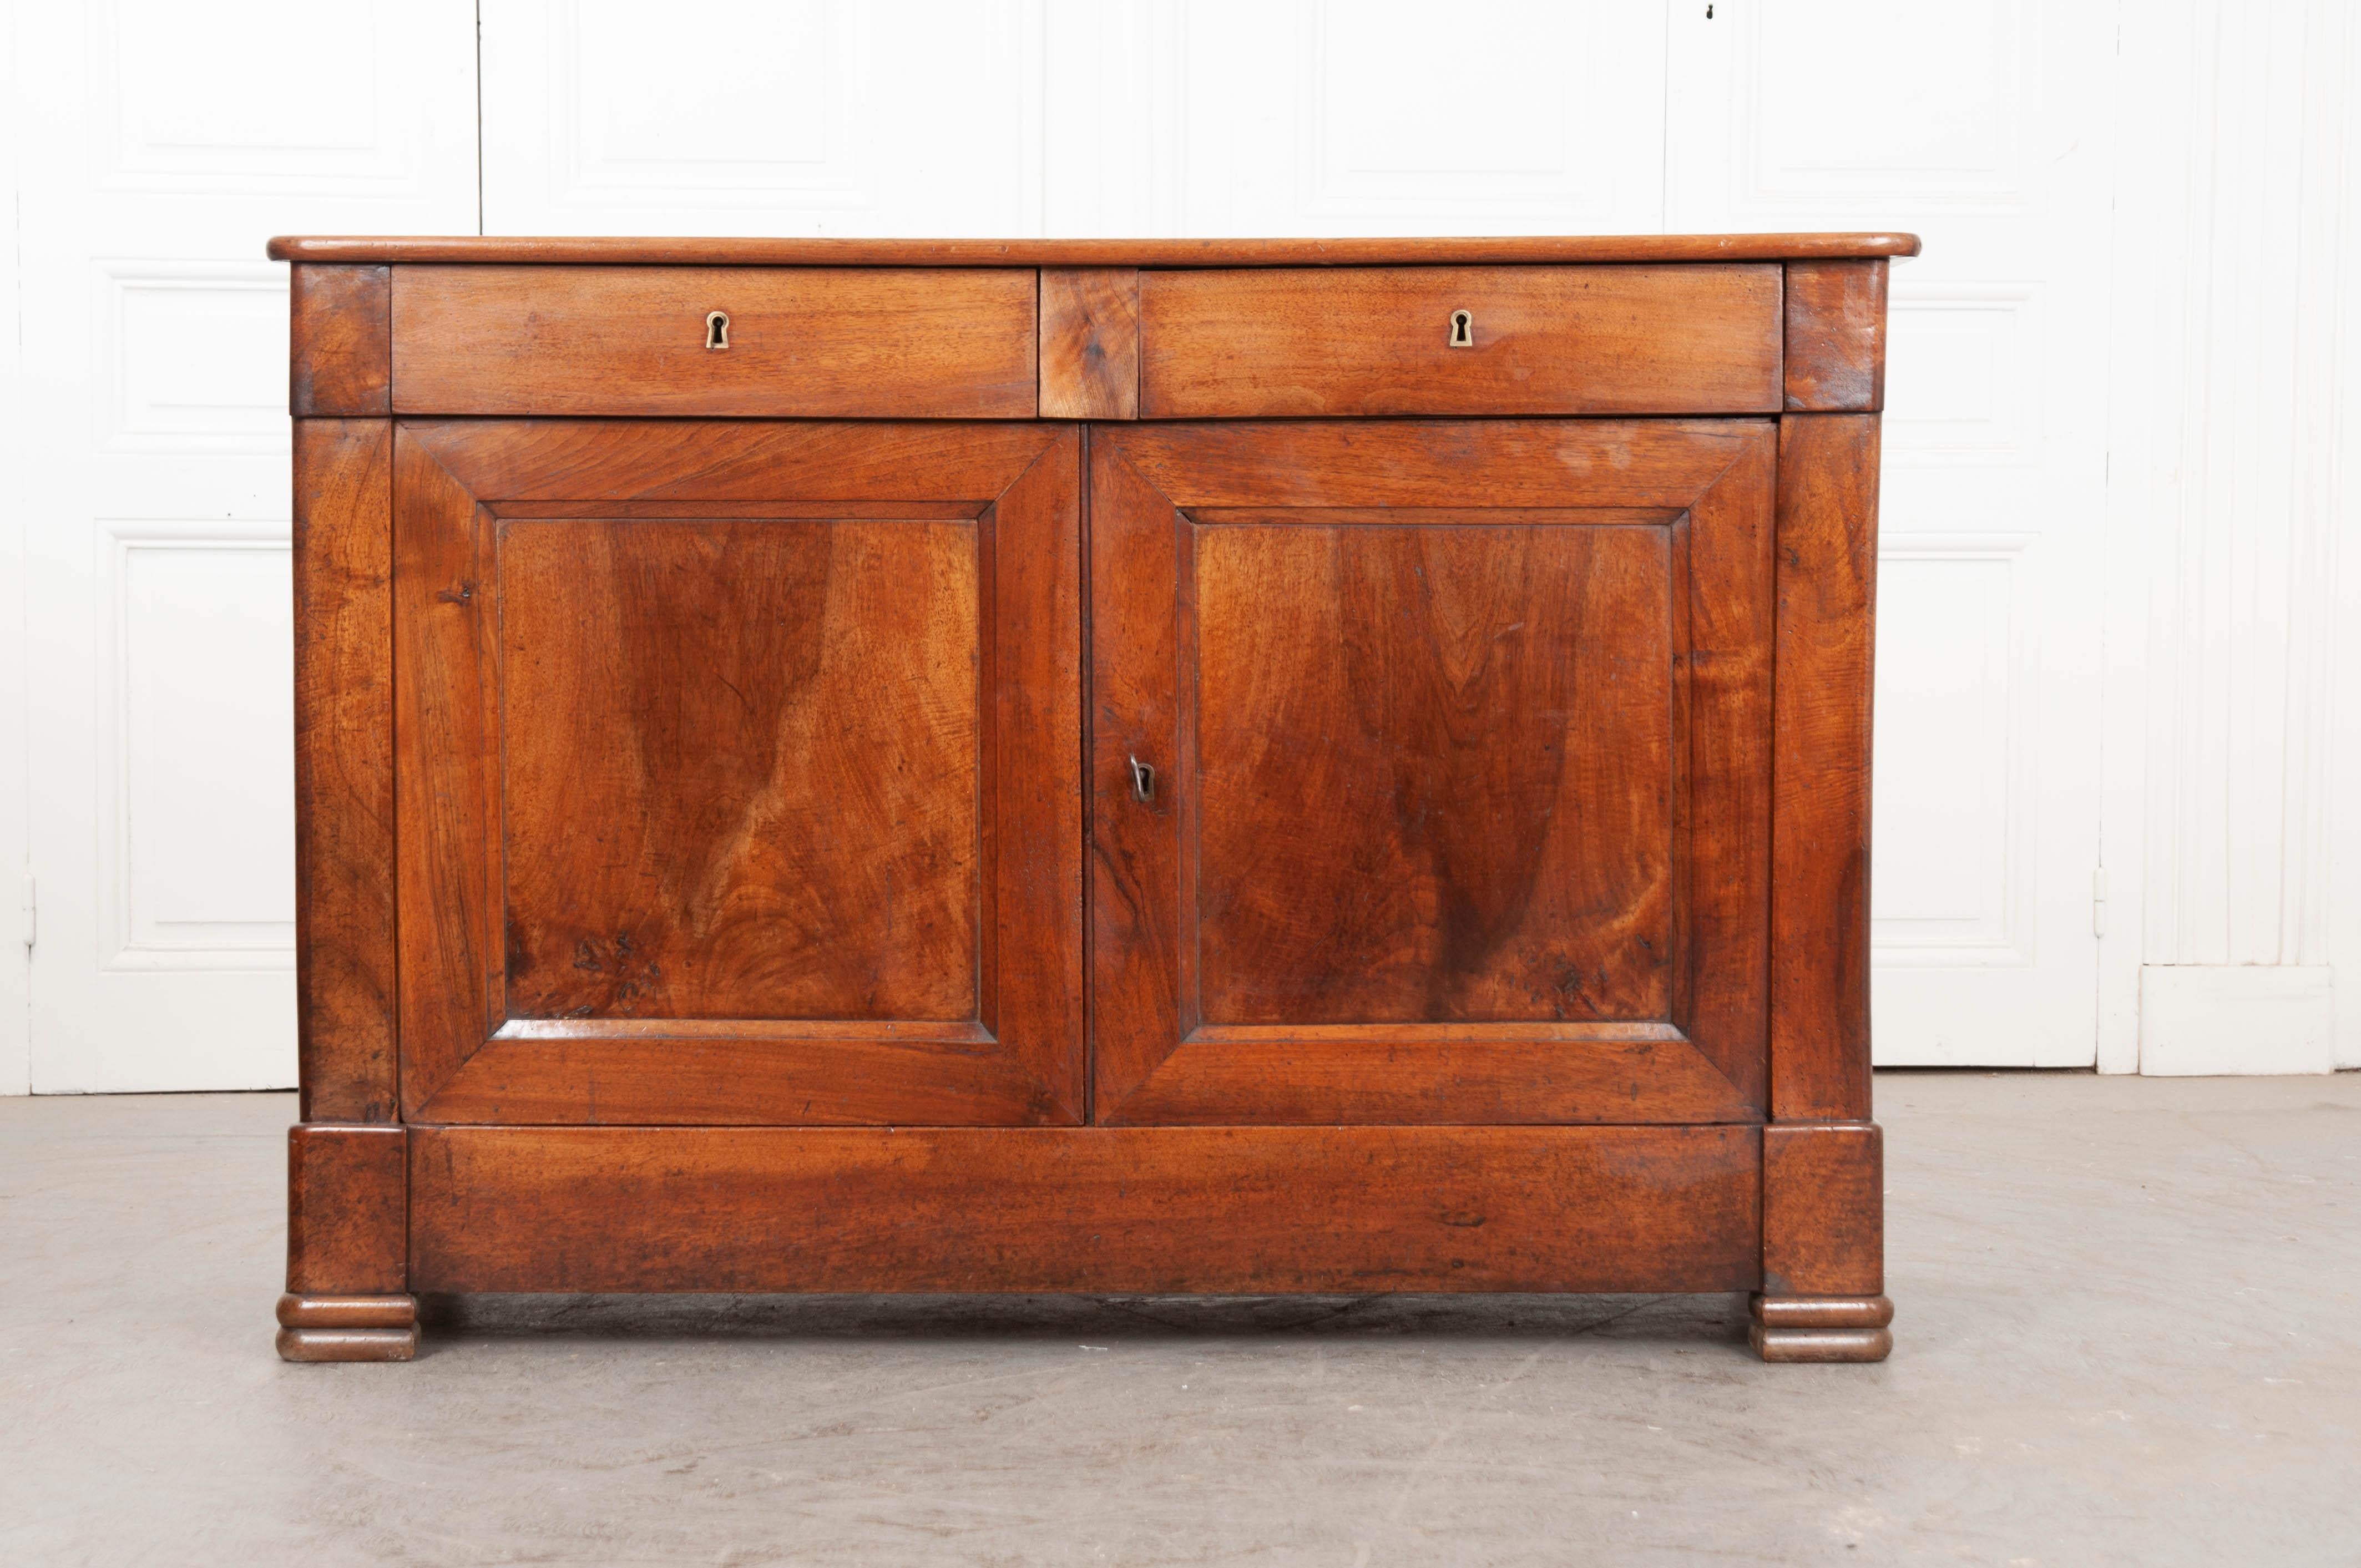 A handsome walnut buffet, made in France, circa 1880. The case piece has been constructed in a transitional style that is heavily influenced by the Louis Philippe period. The apron contains two drawers, each with working locks. Two paneled doors